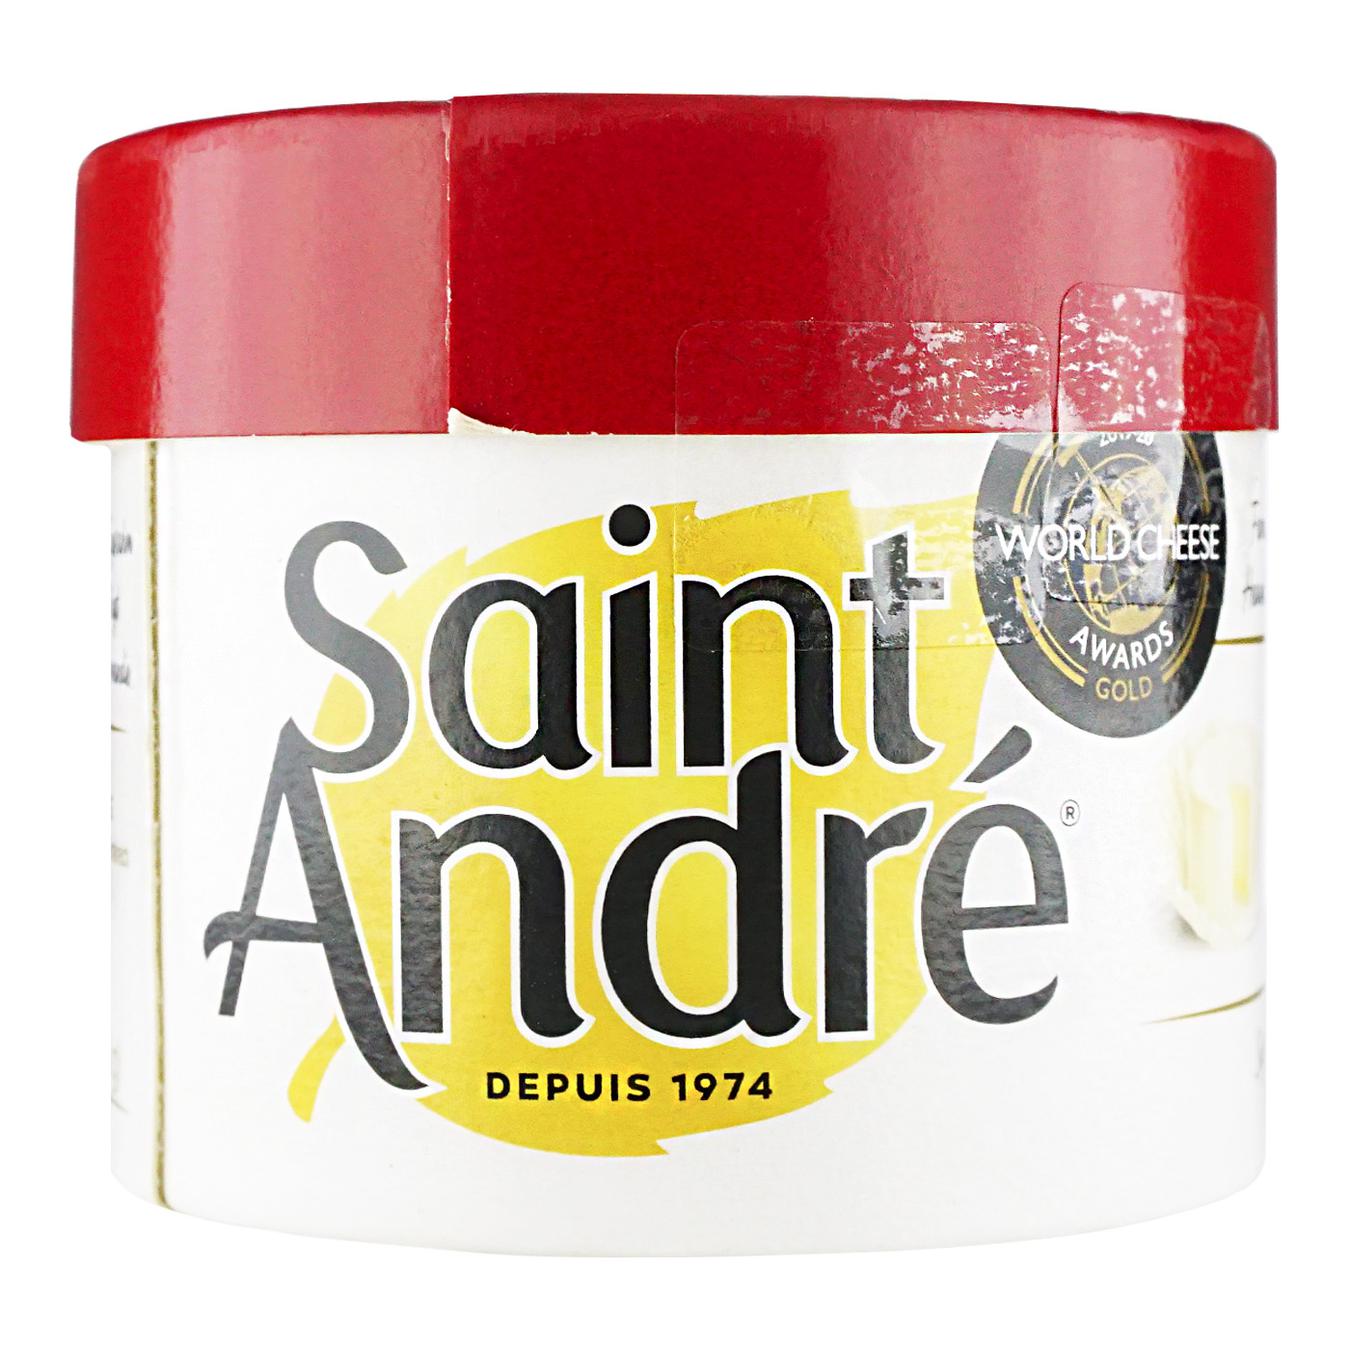 CFR Saint Andre cheese 200g